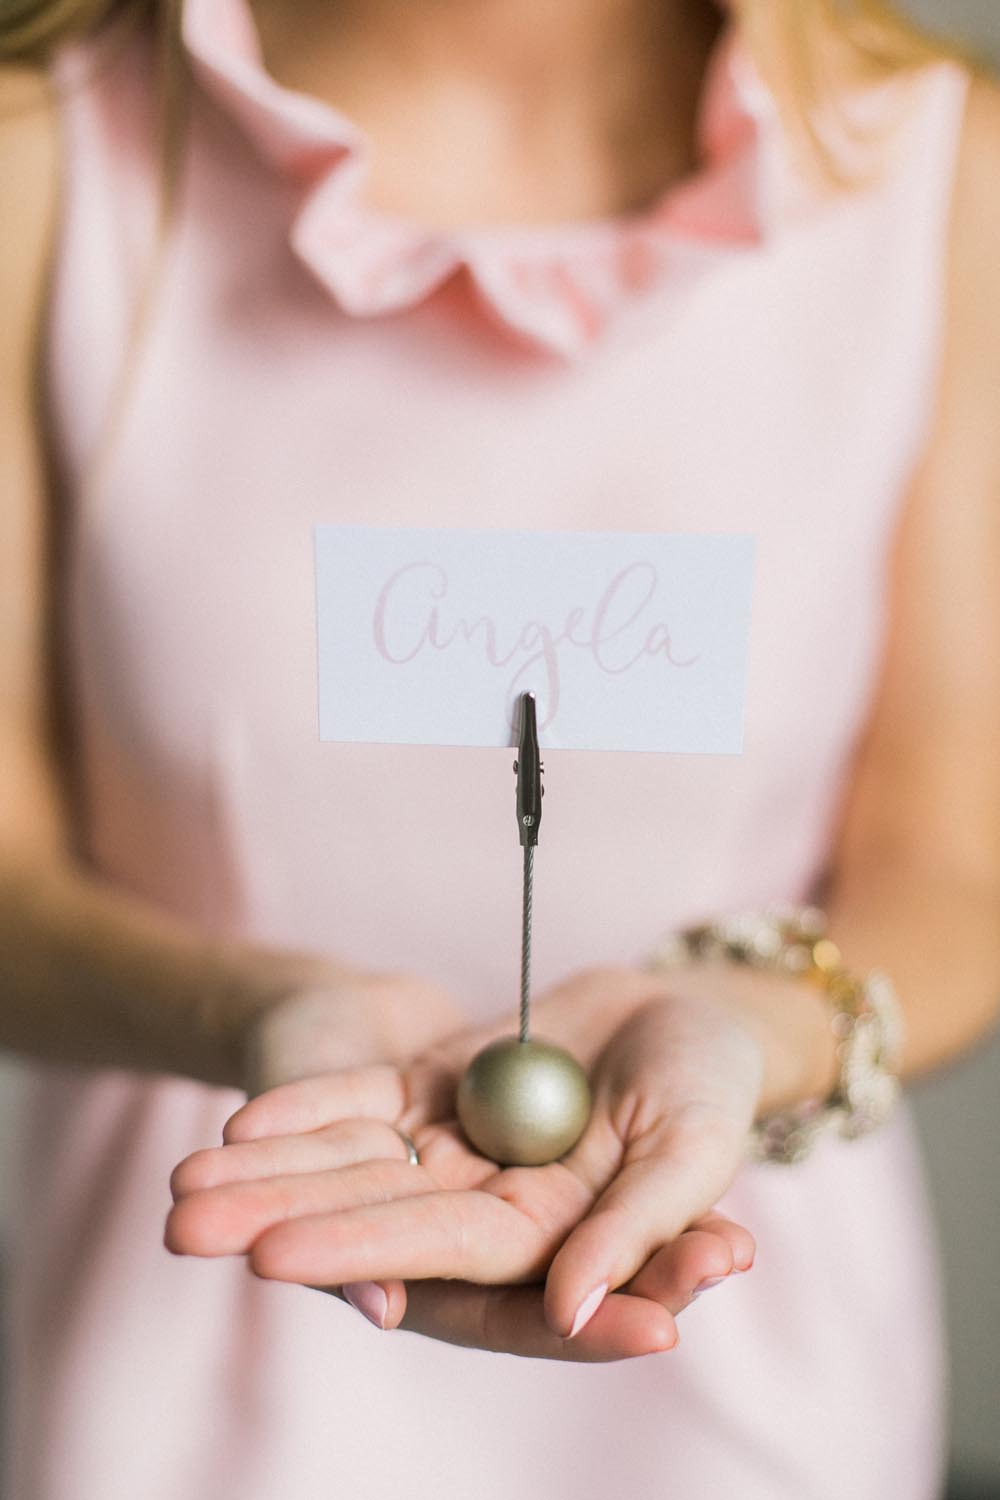 View More: http://laurelynsavannah.pass.us/mint-lovely-styled-shoots